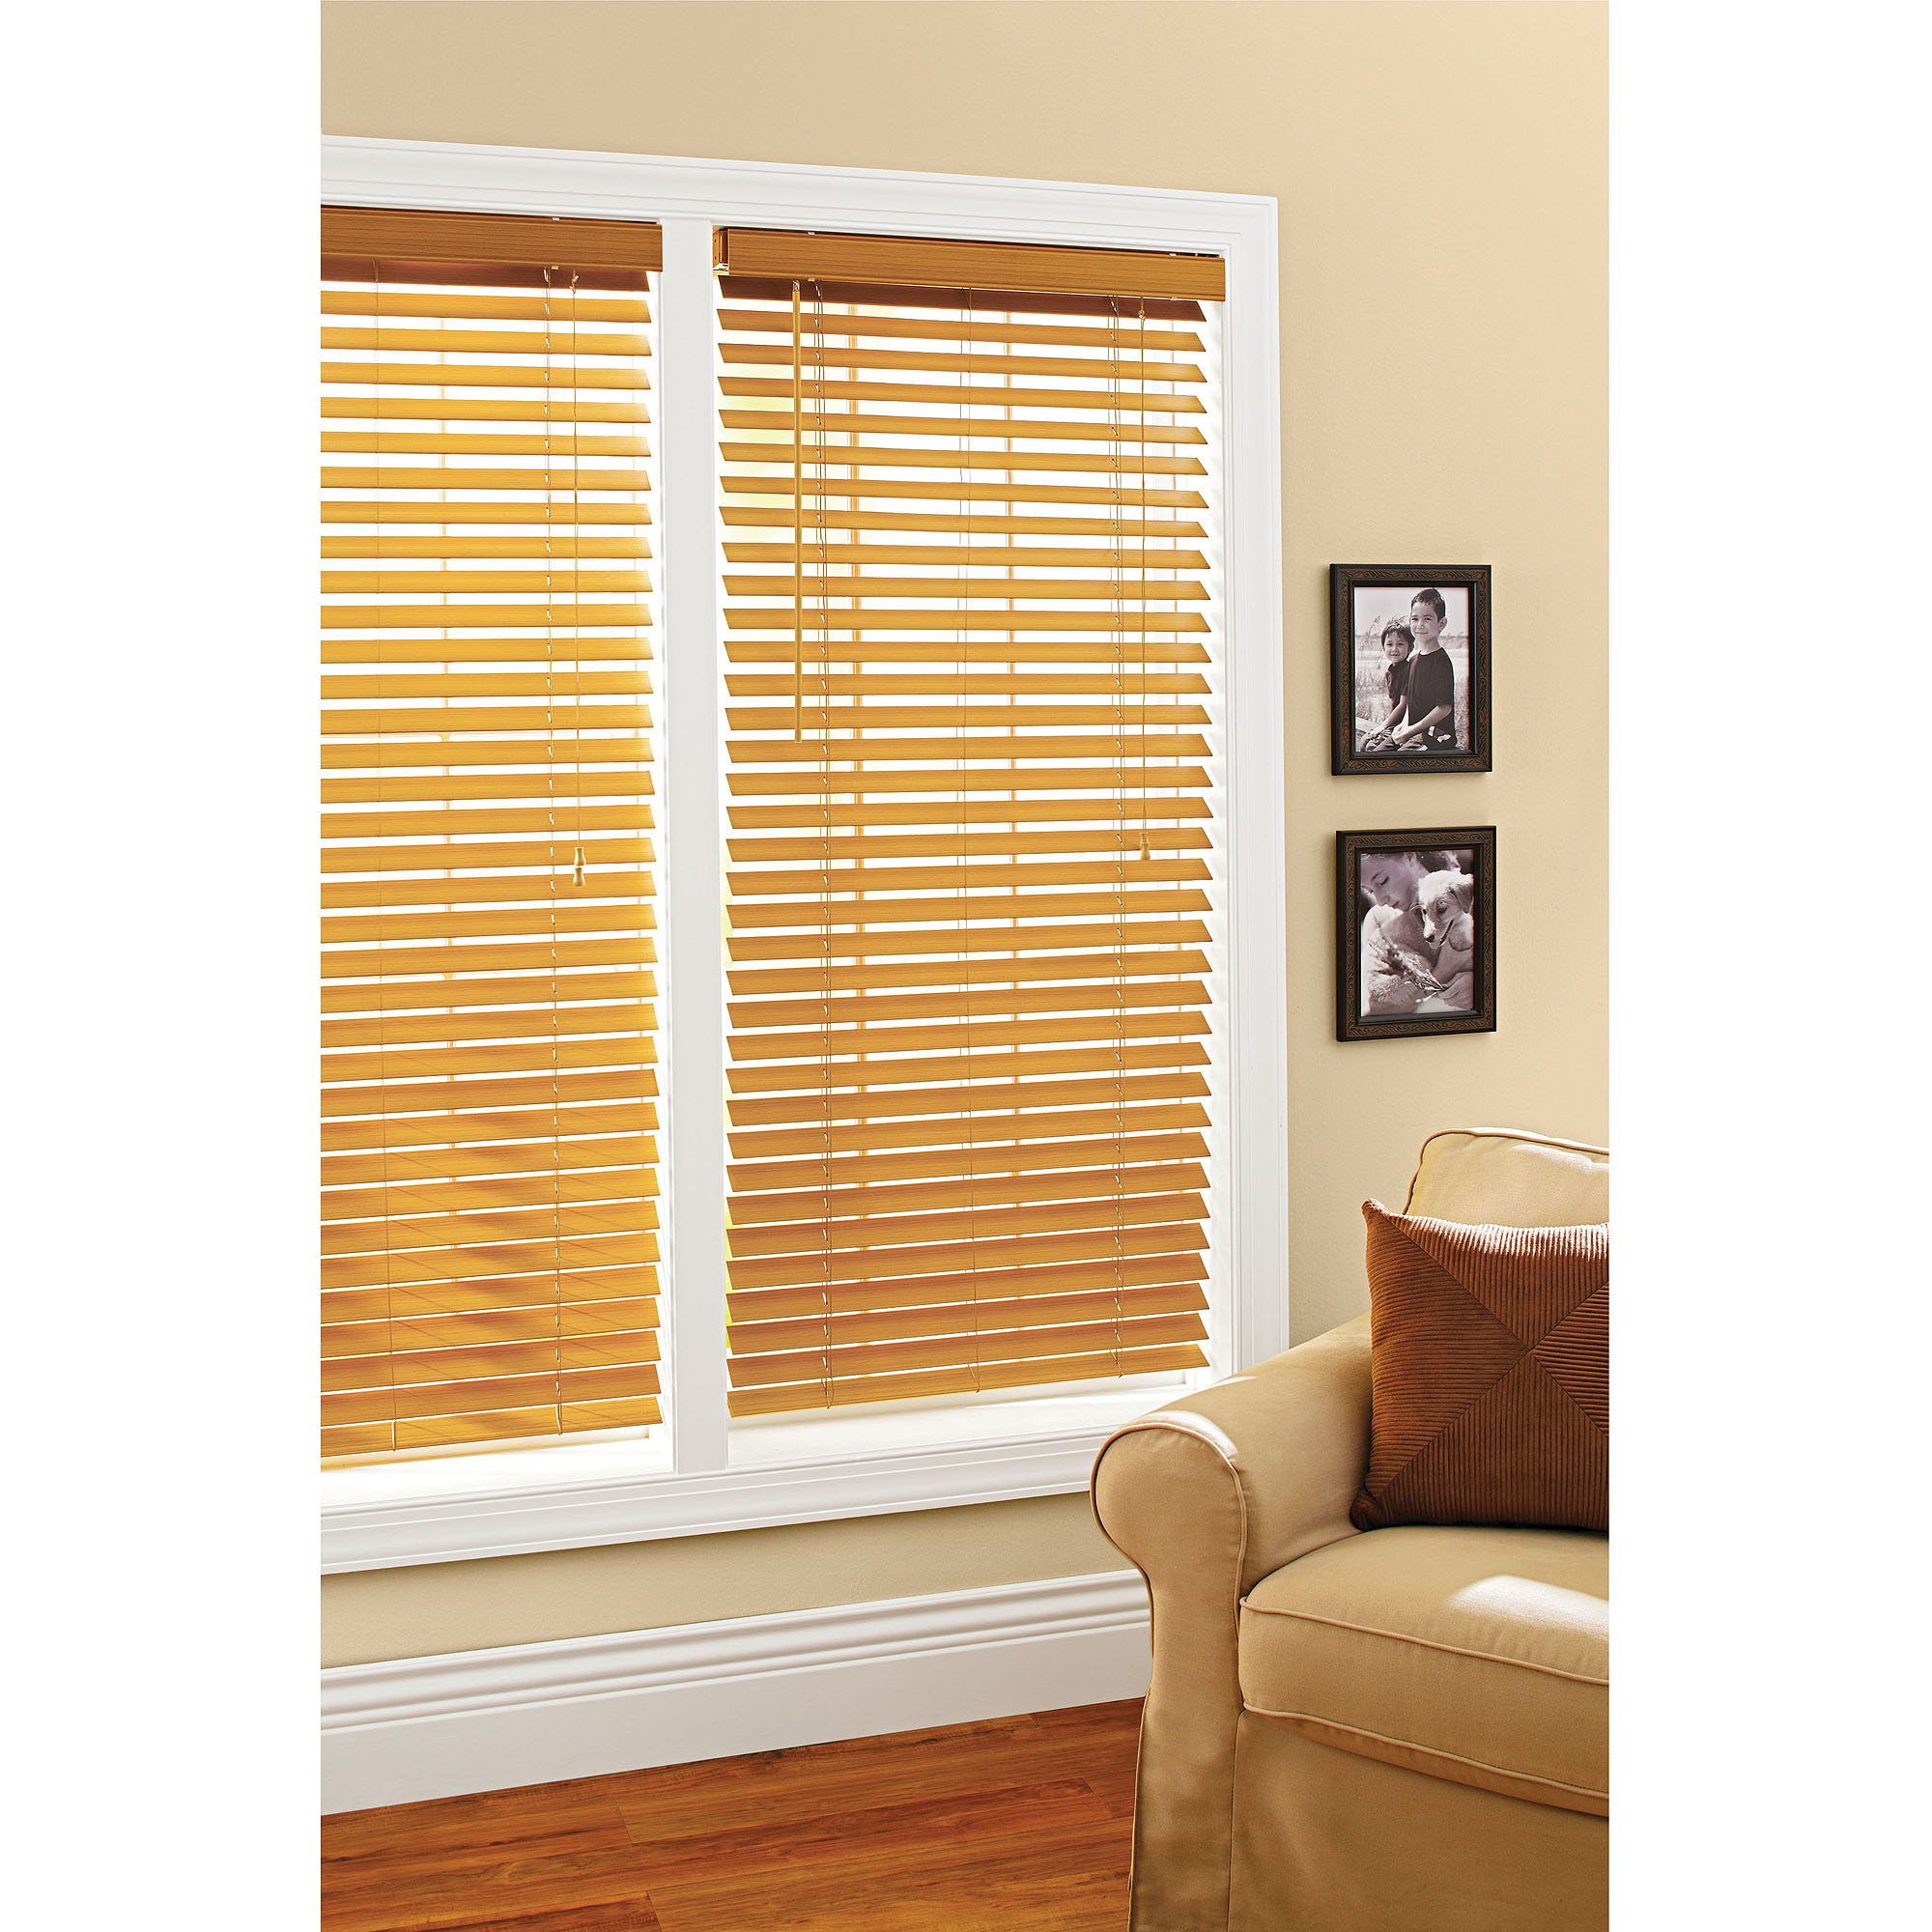 wooden window blinds better homes and gardens 2 SMGWDGD